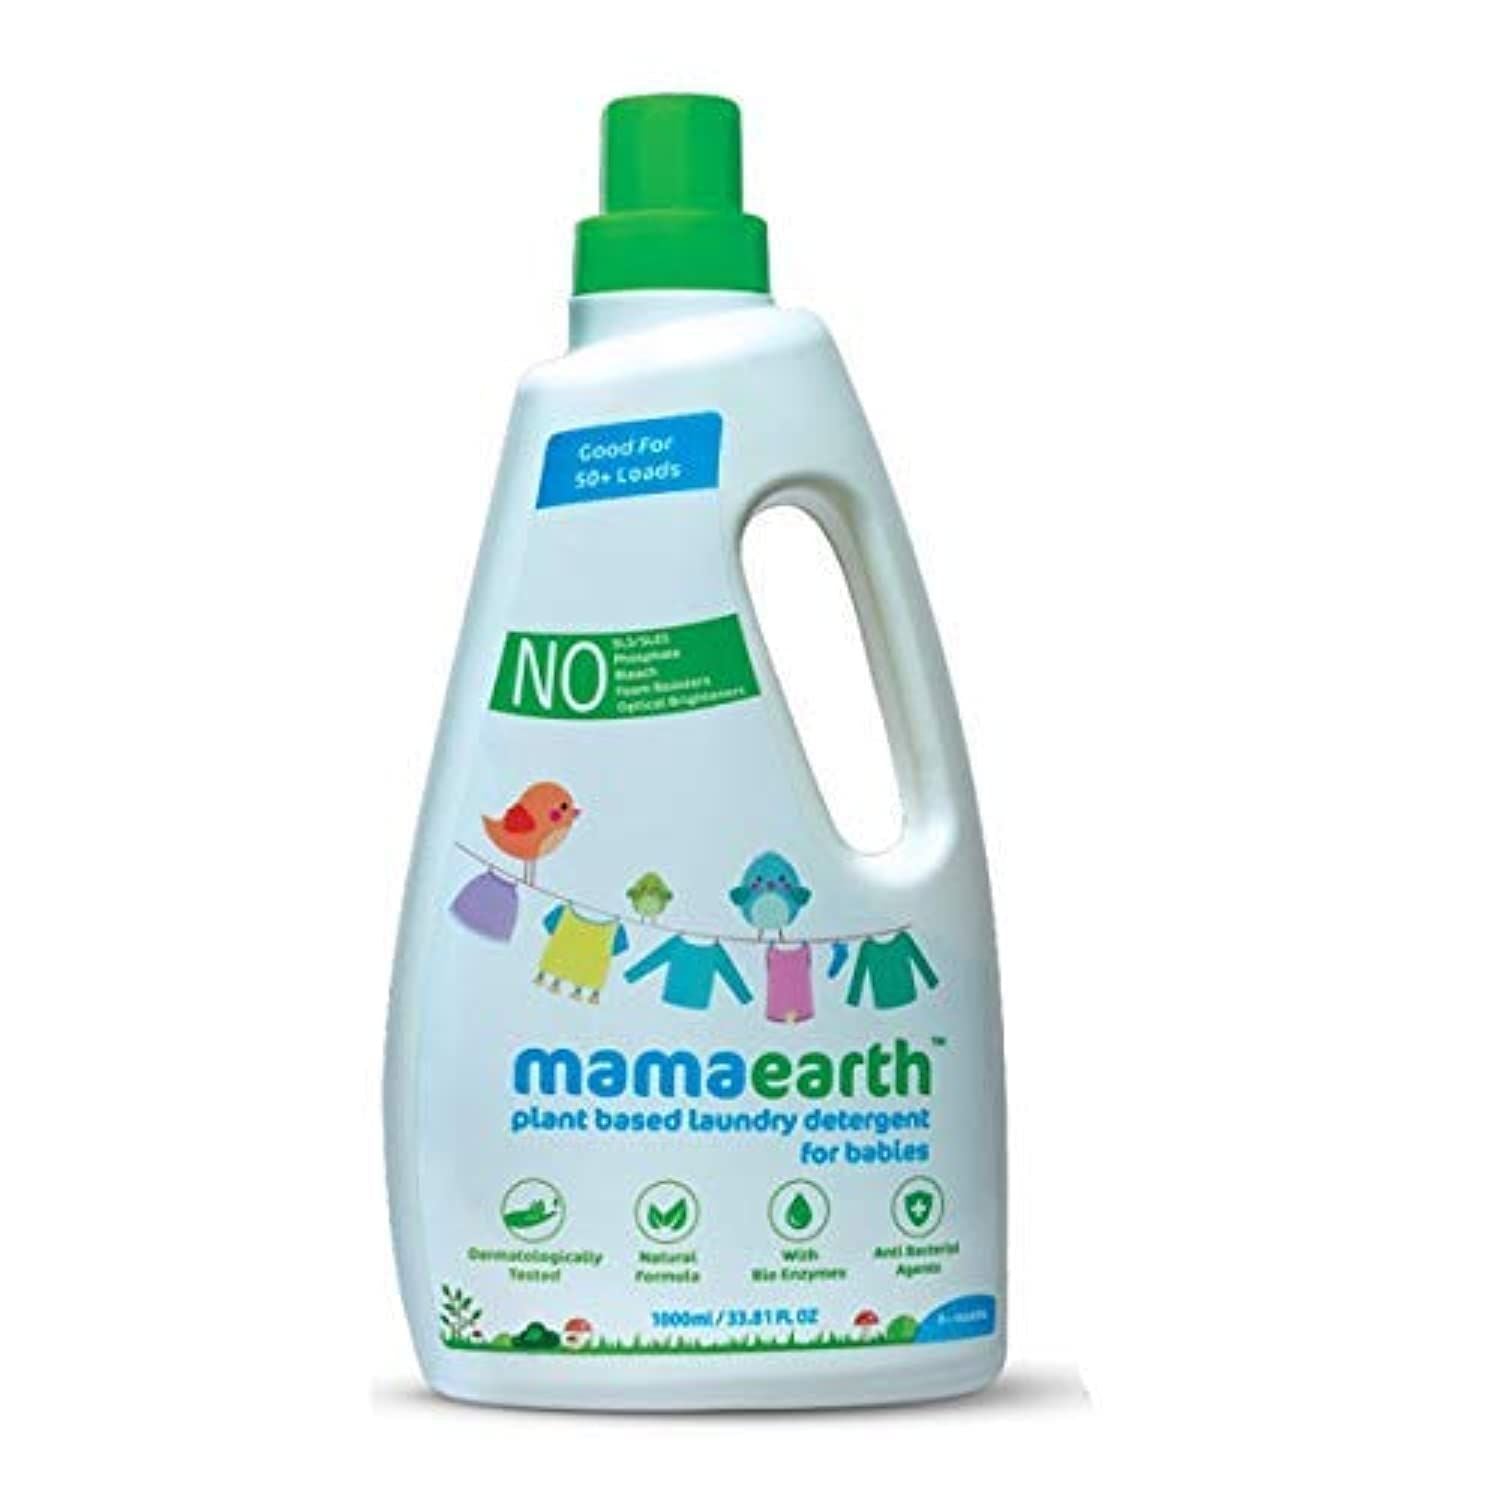 Plant based laundry detergent, 1000ml (Saver Pack, get 40% extra)